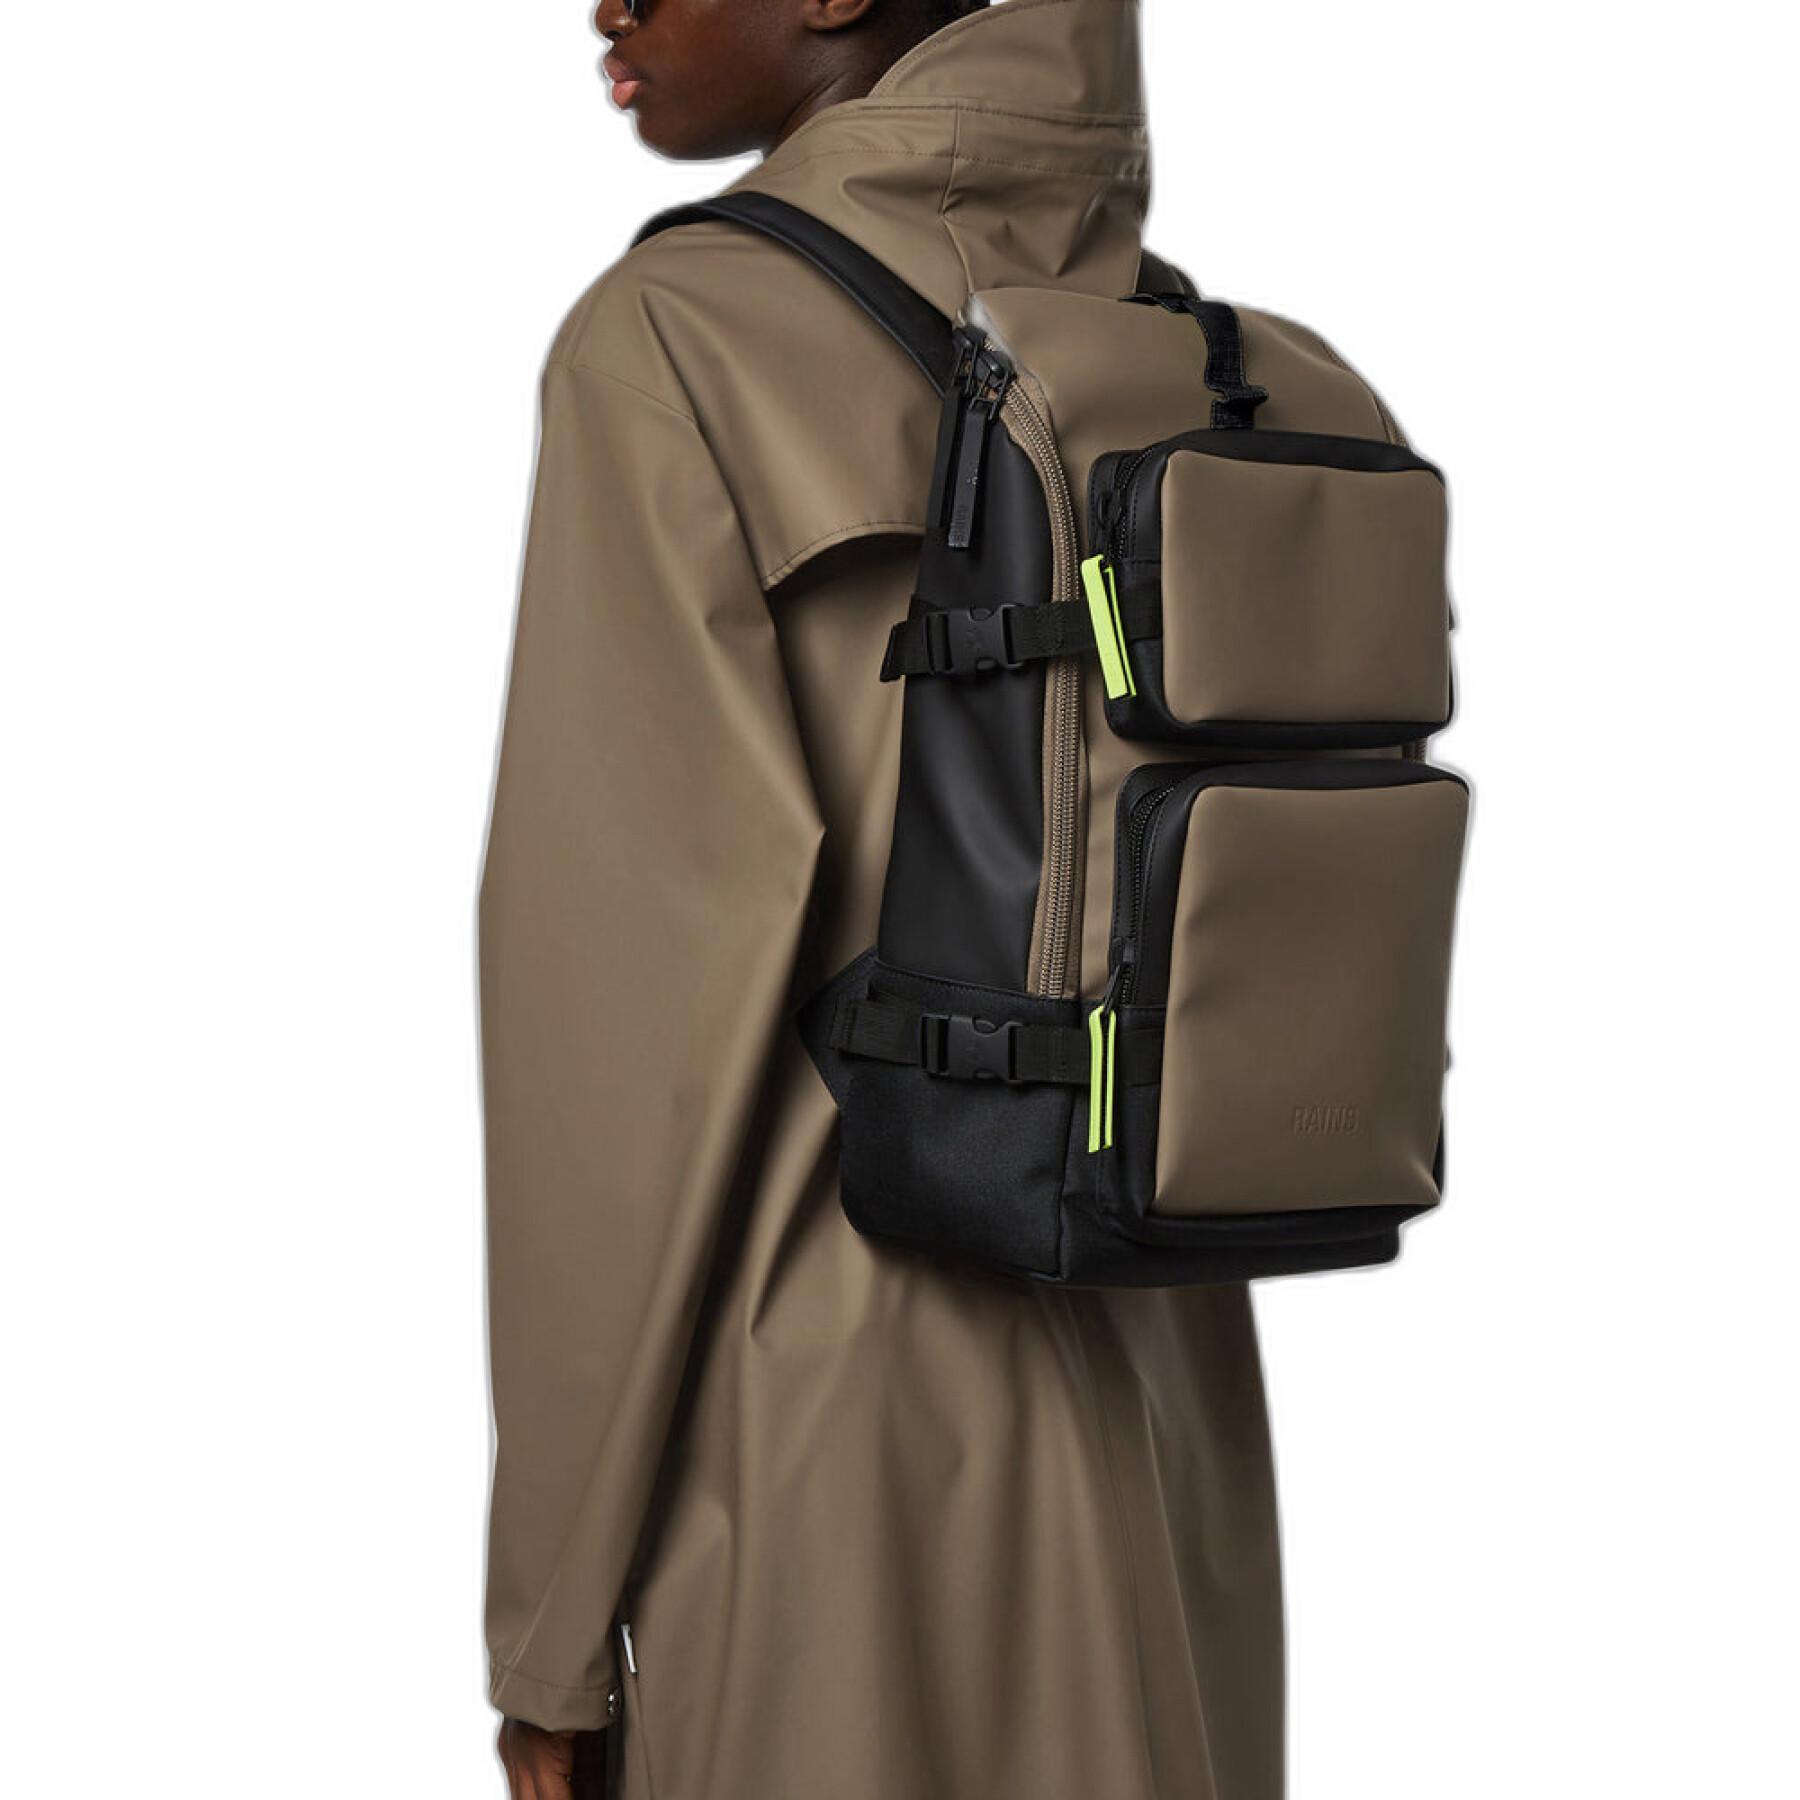 Backpack Rains Charger